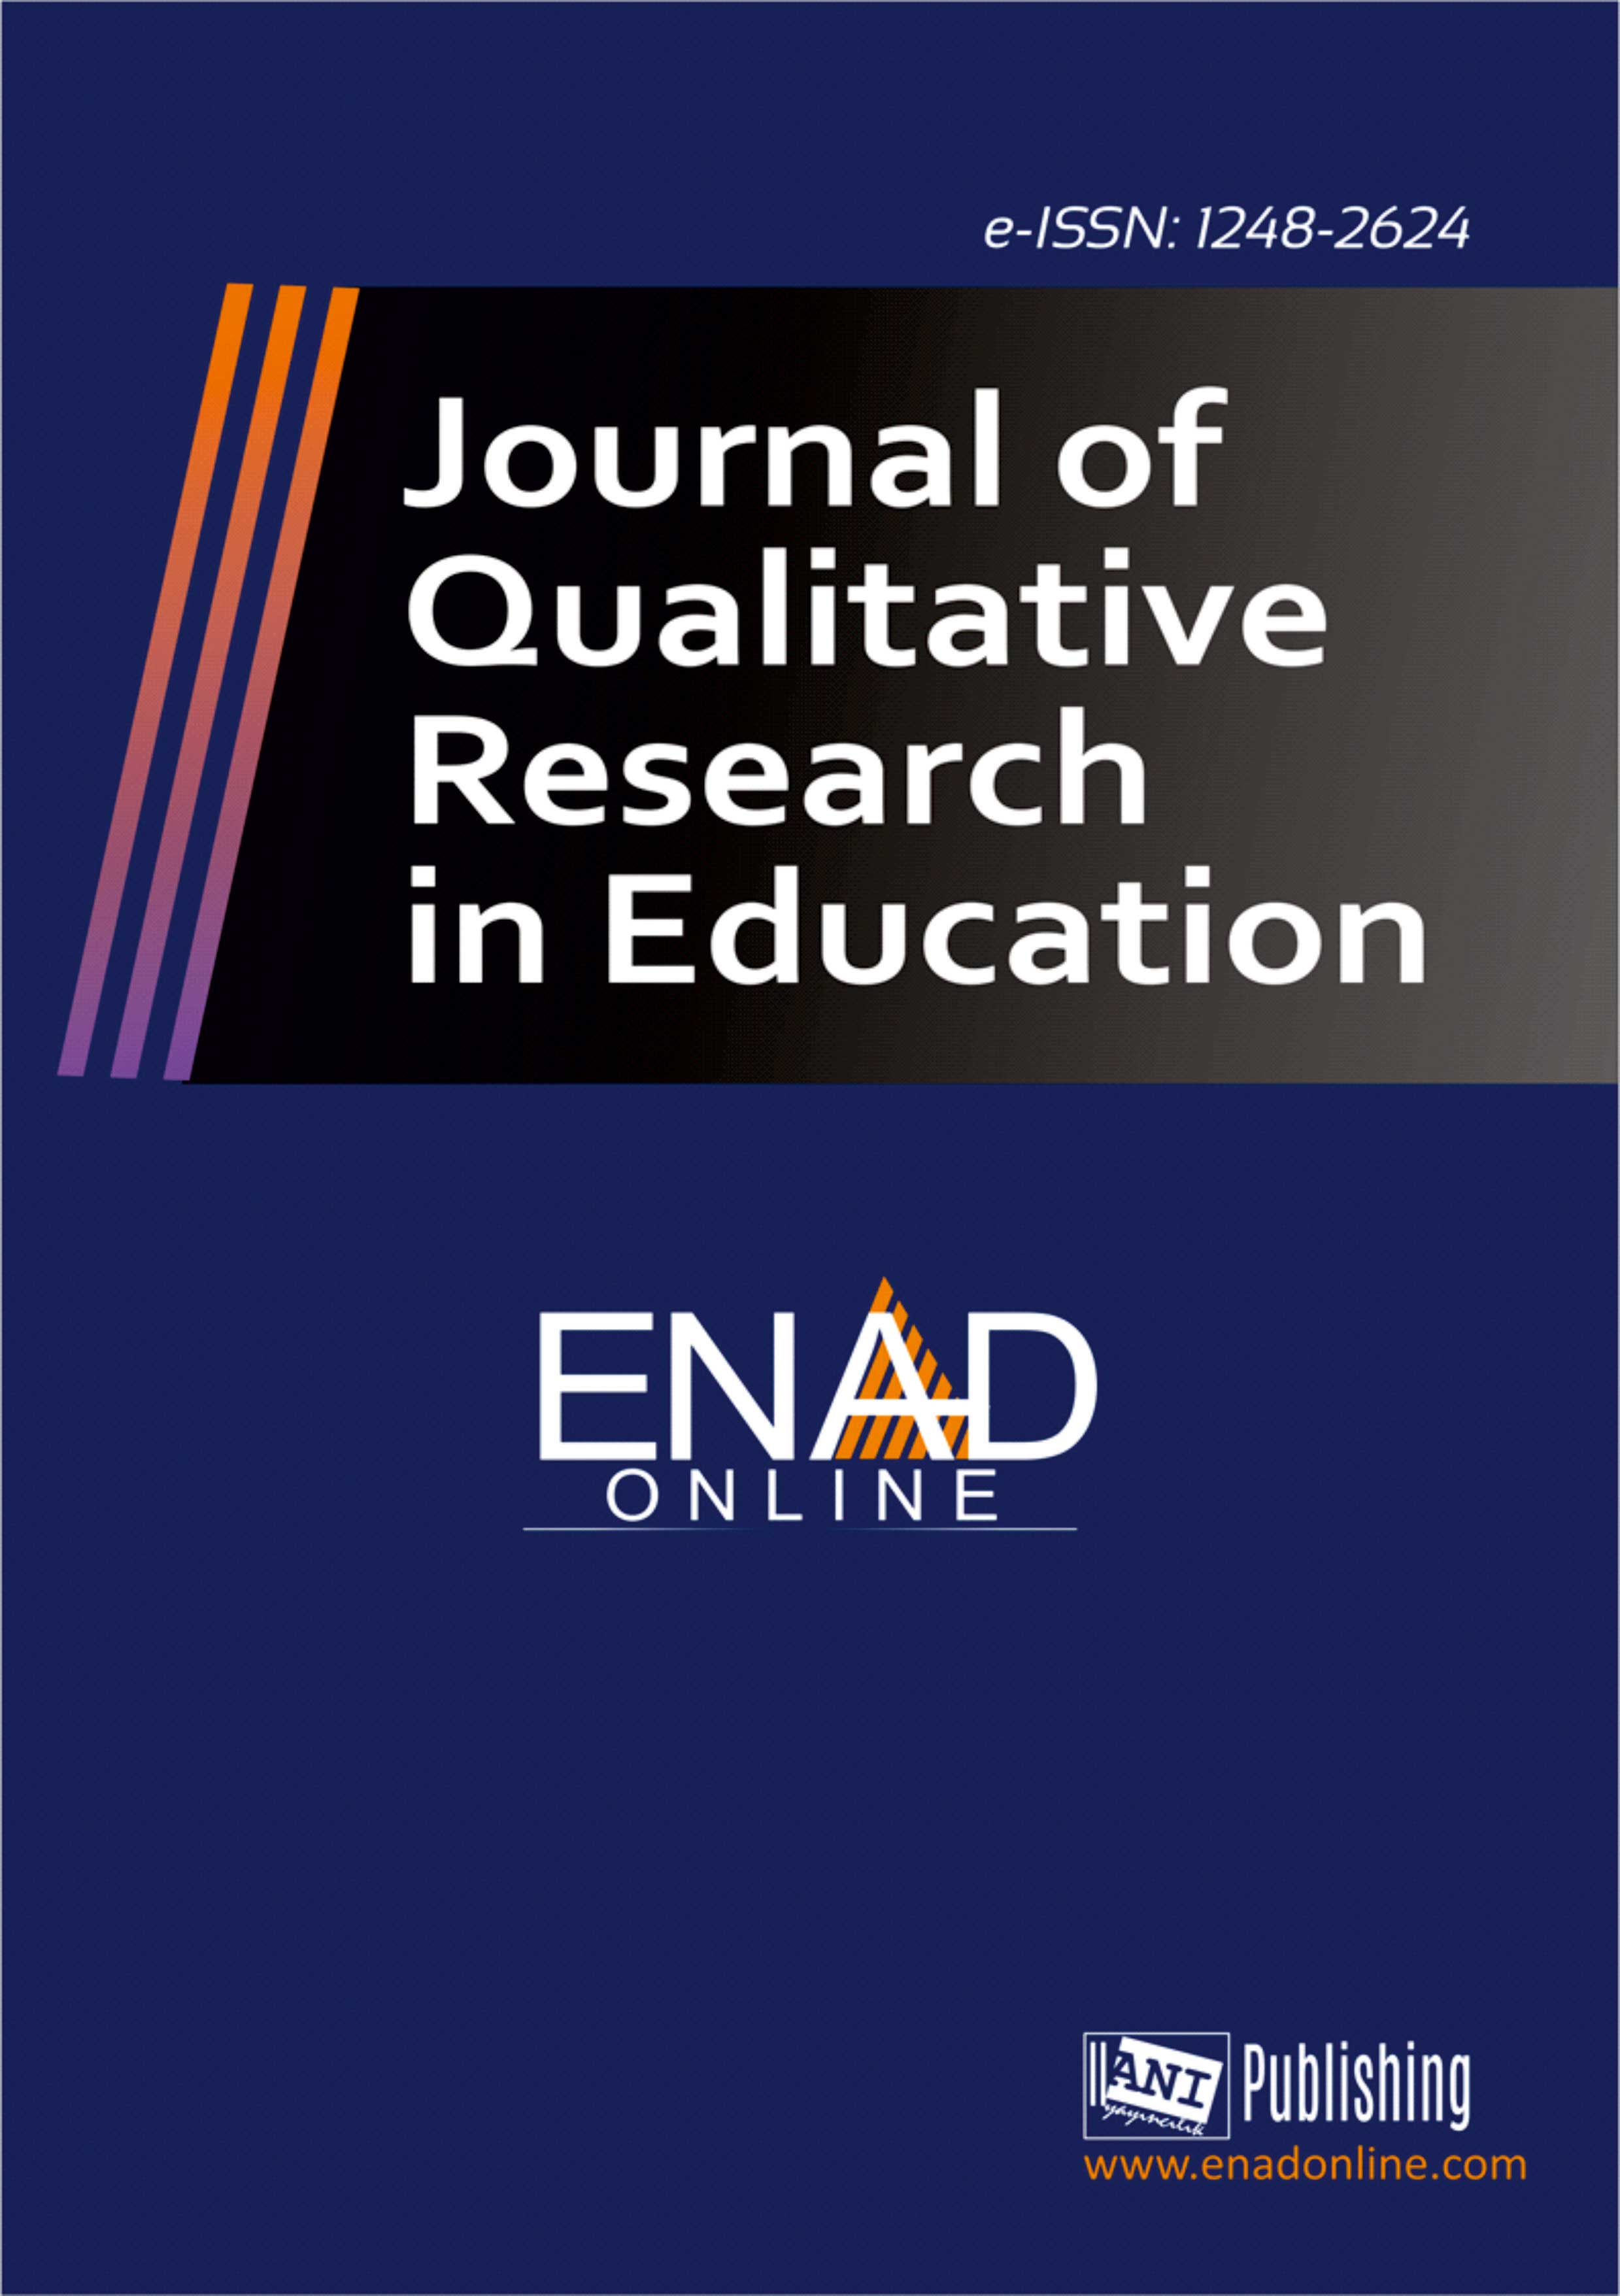 					View Vol. 6 Issue 3 (2019): Journal of Qualitative Research in Education
				